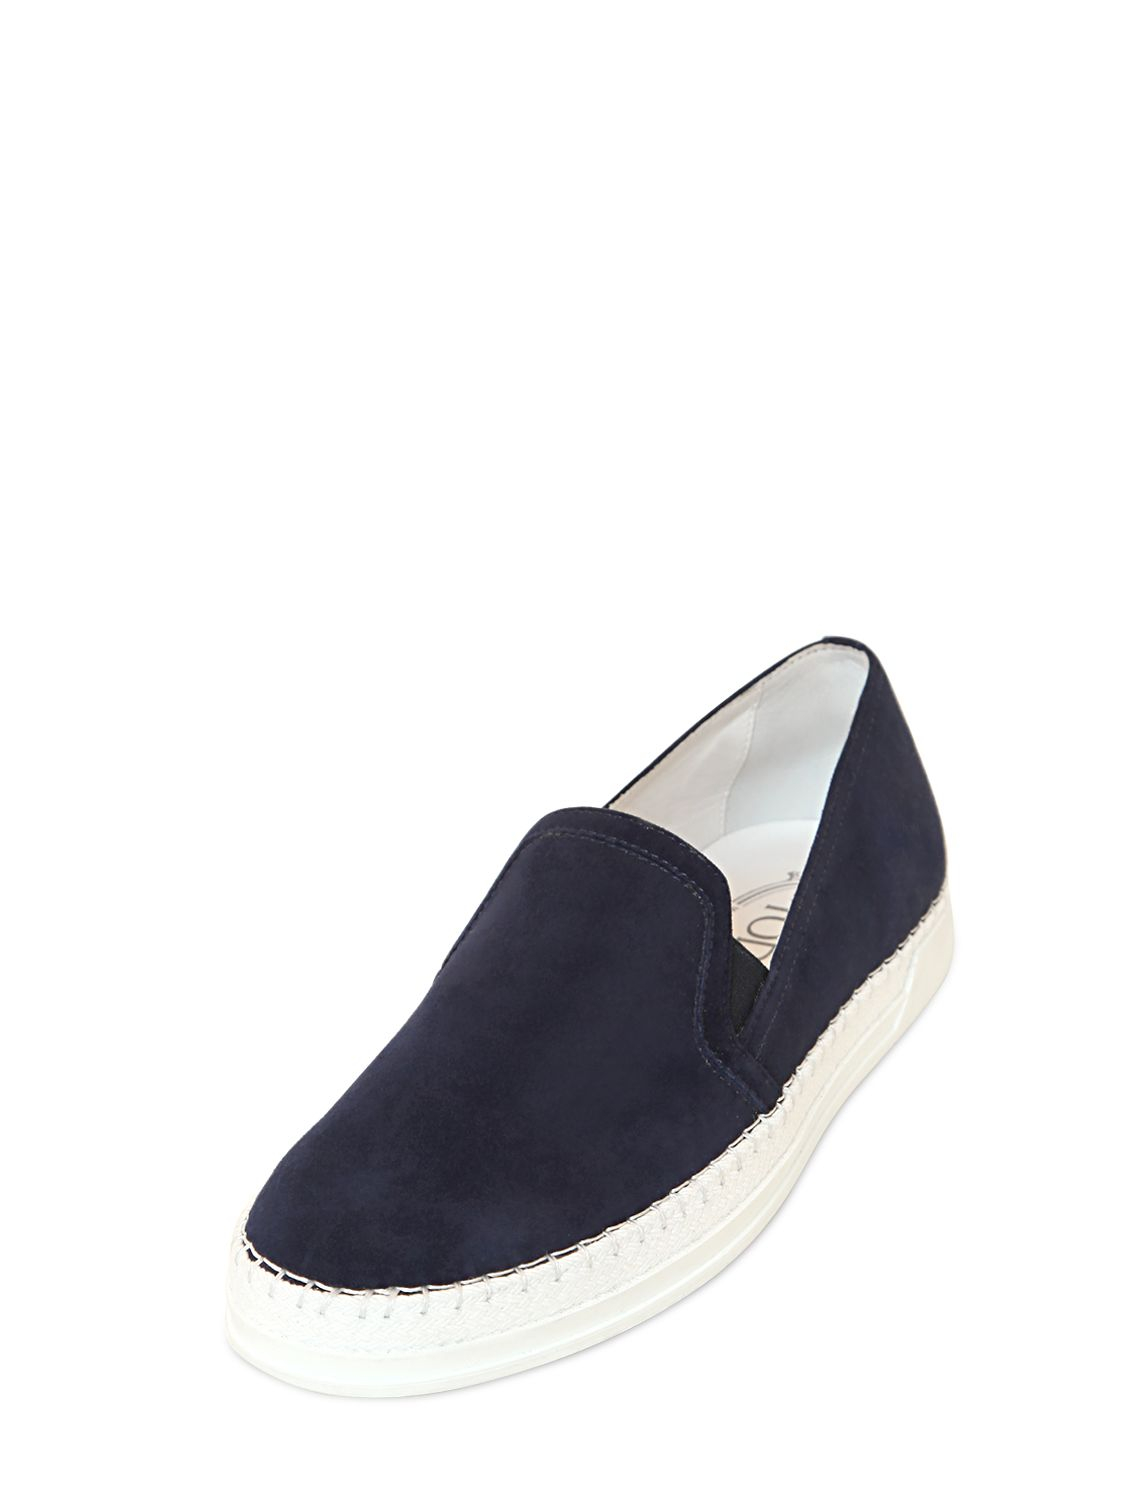 Lyst - Tod'S Suede Slip On Sneakers in Blue for Men